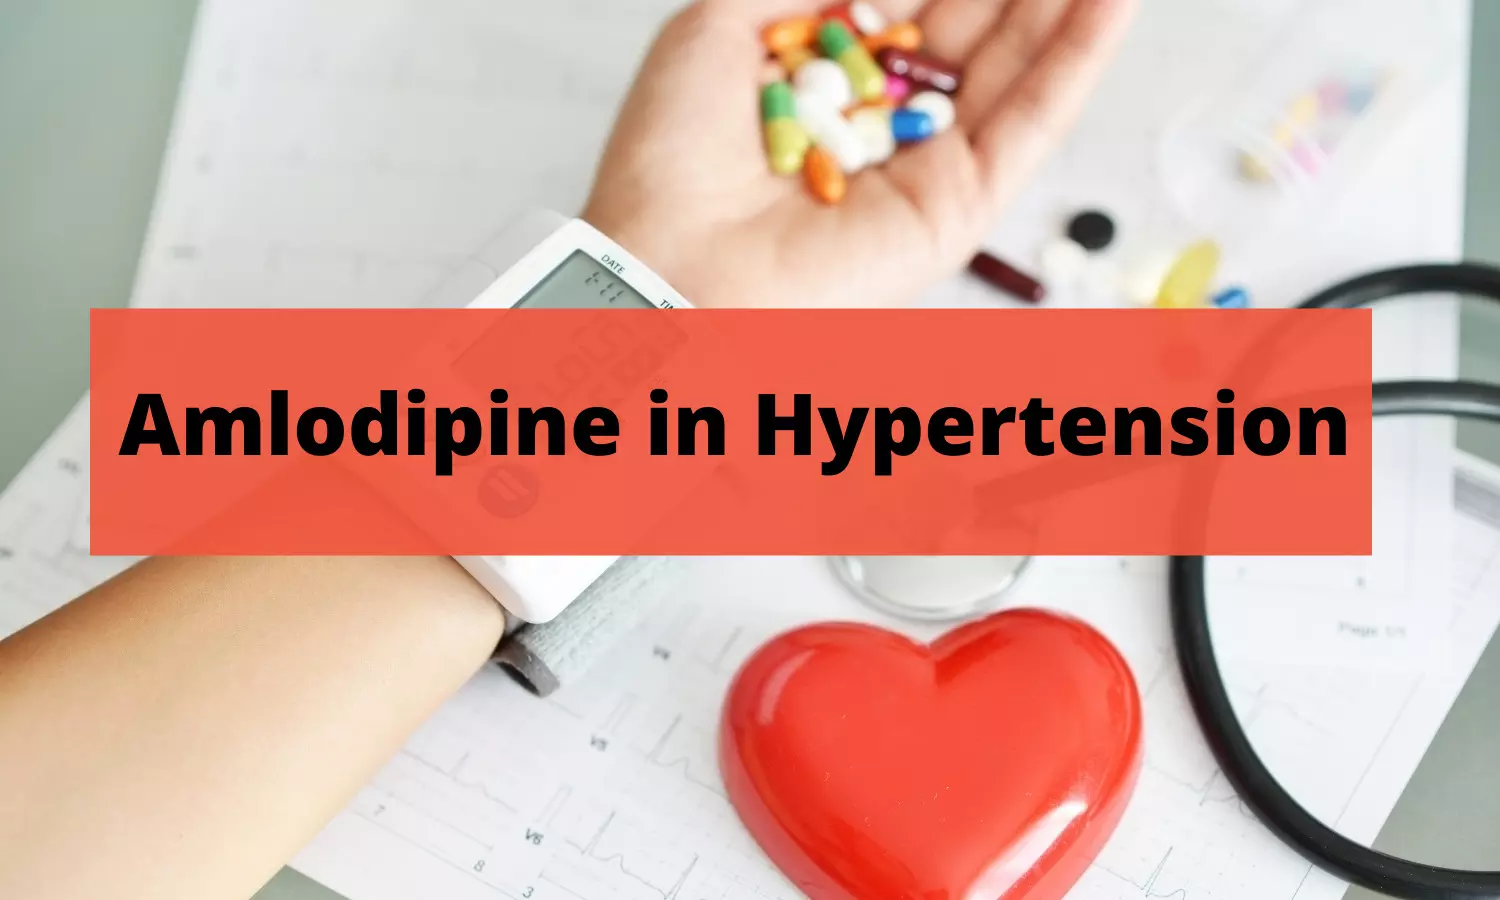 When to Introduce time tested drug Amlodipine to manage Hypertension?